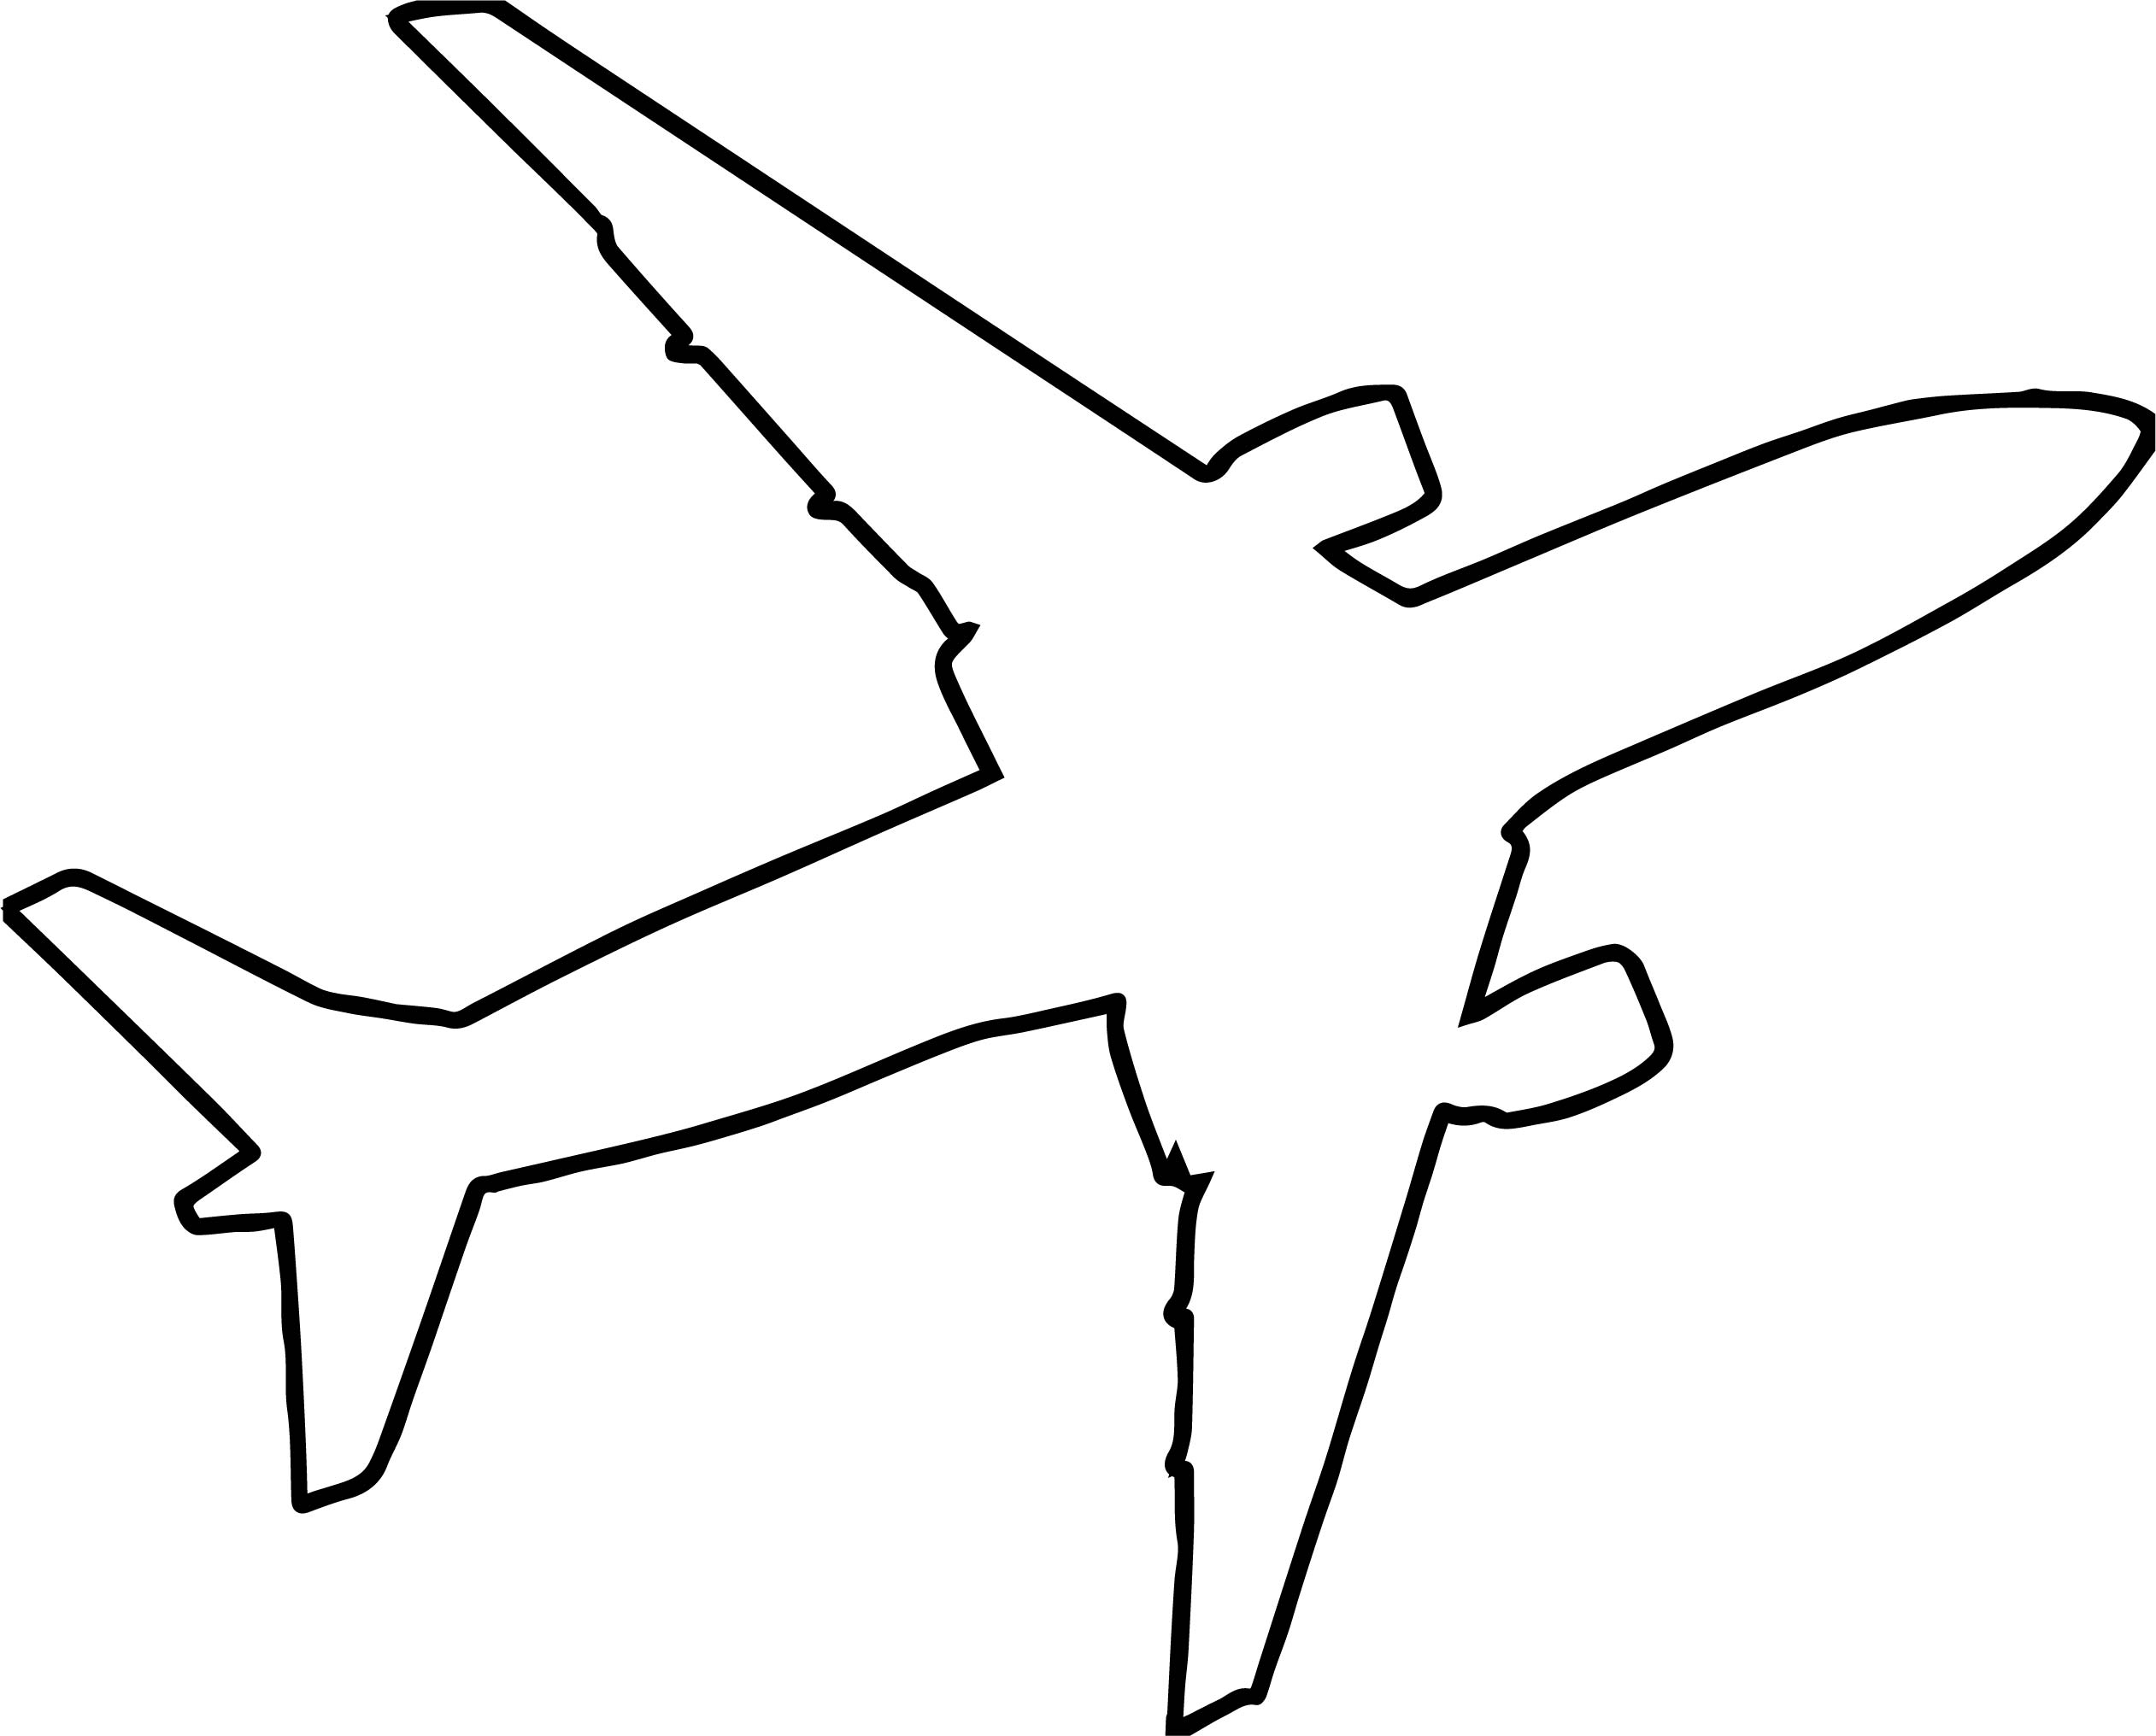 Plane Outline | Free download on ClipArtMag